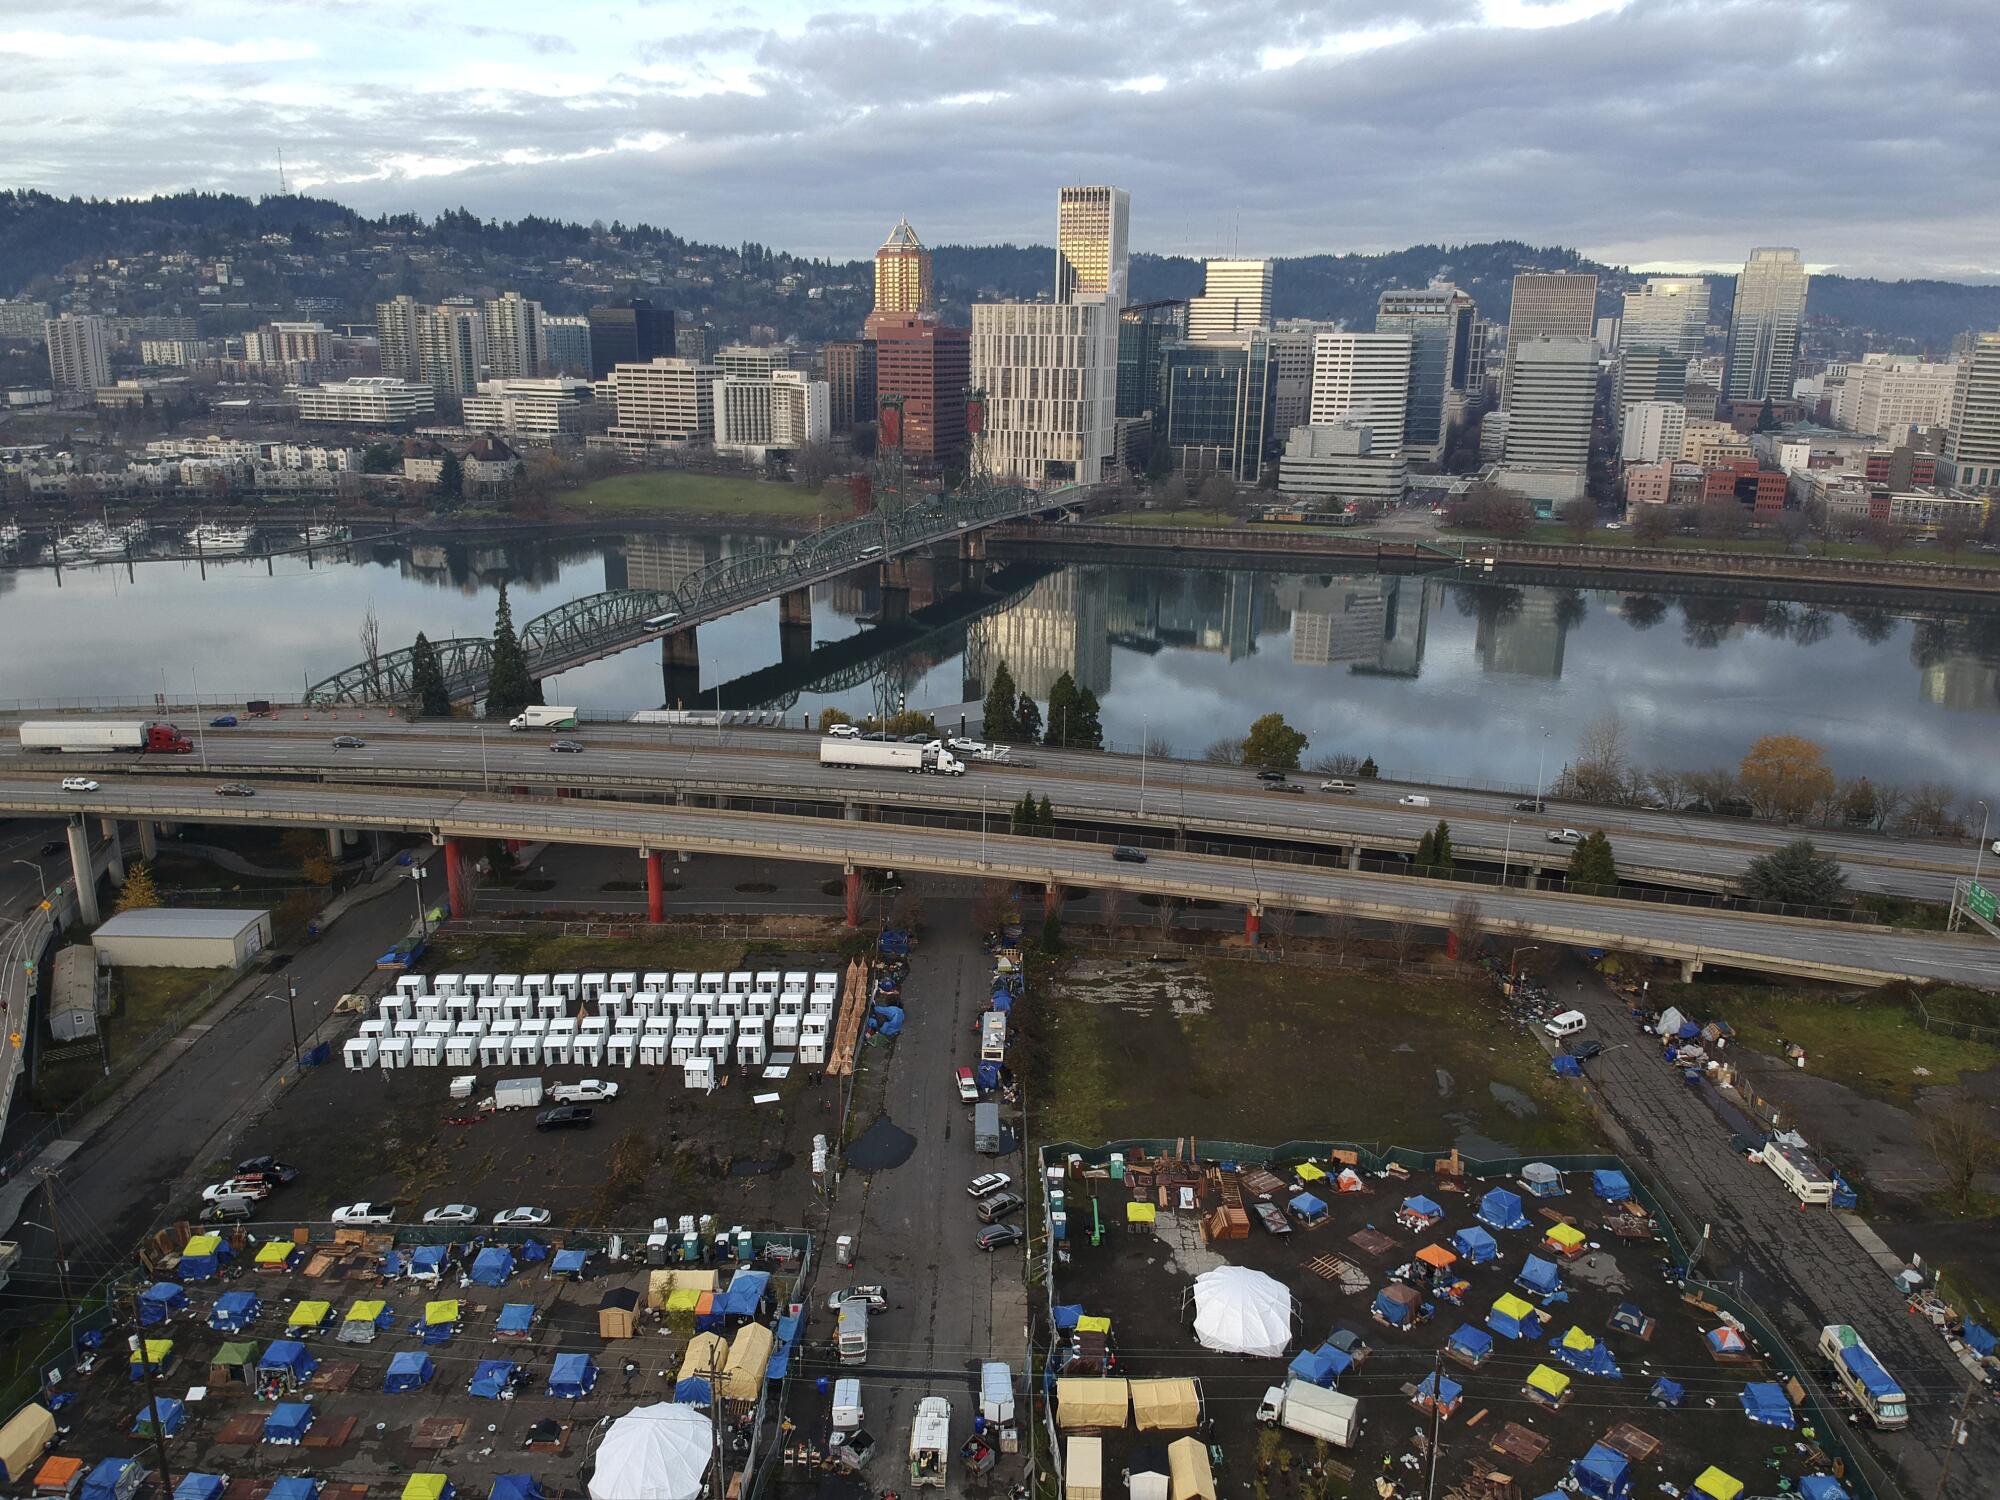 An aerial photo shows tents filling an empty Portland parking lot next to an elevated road alongside a river.